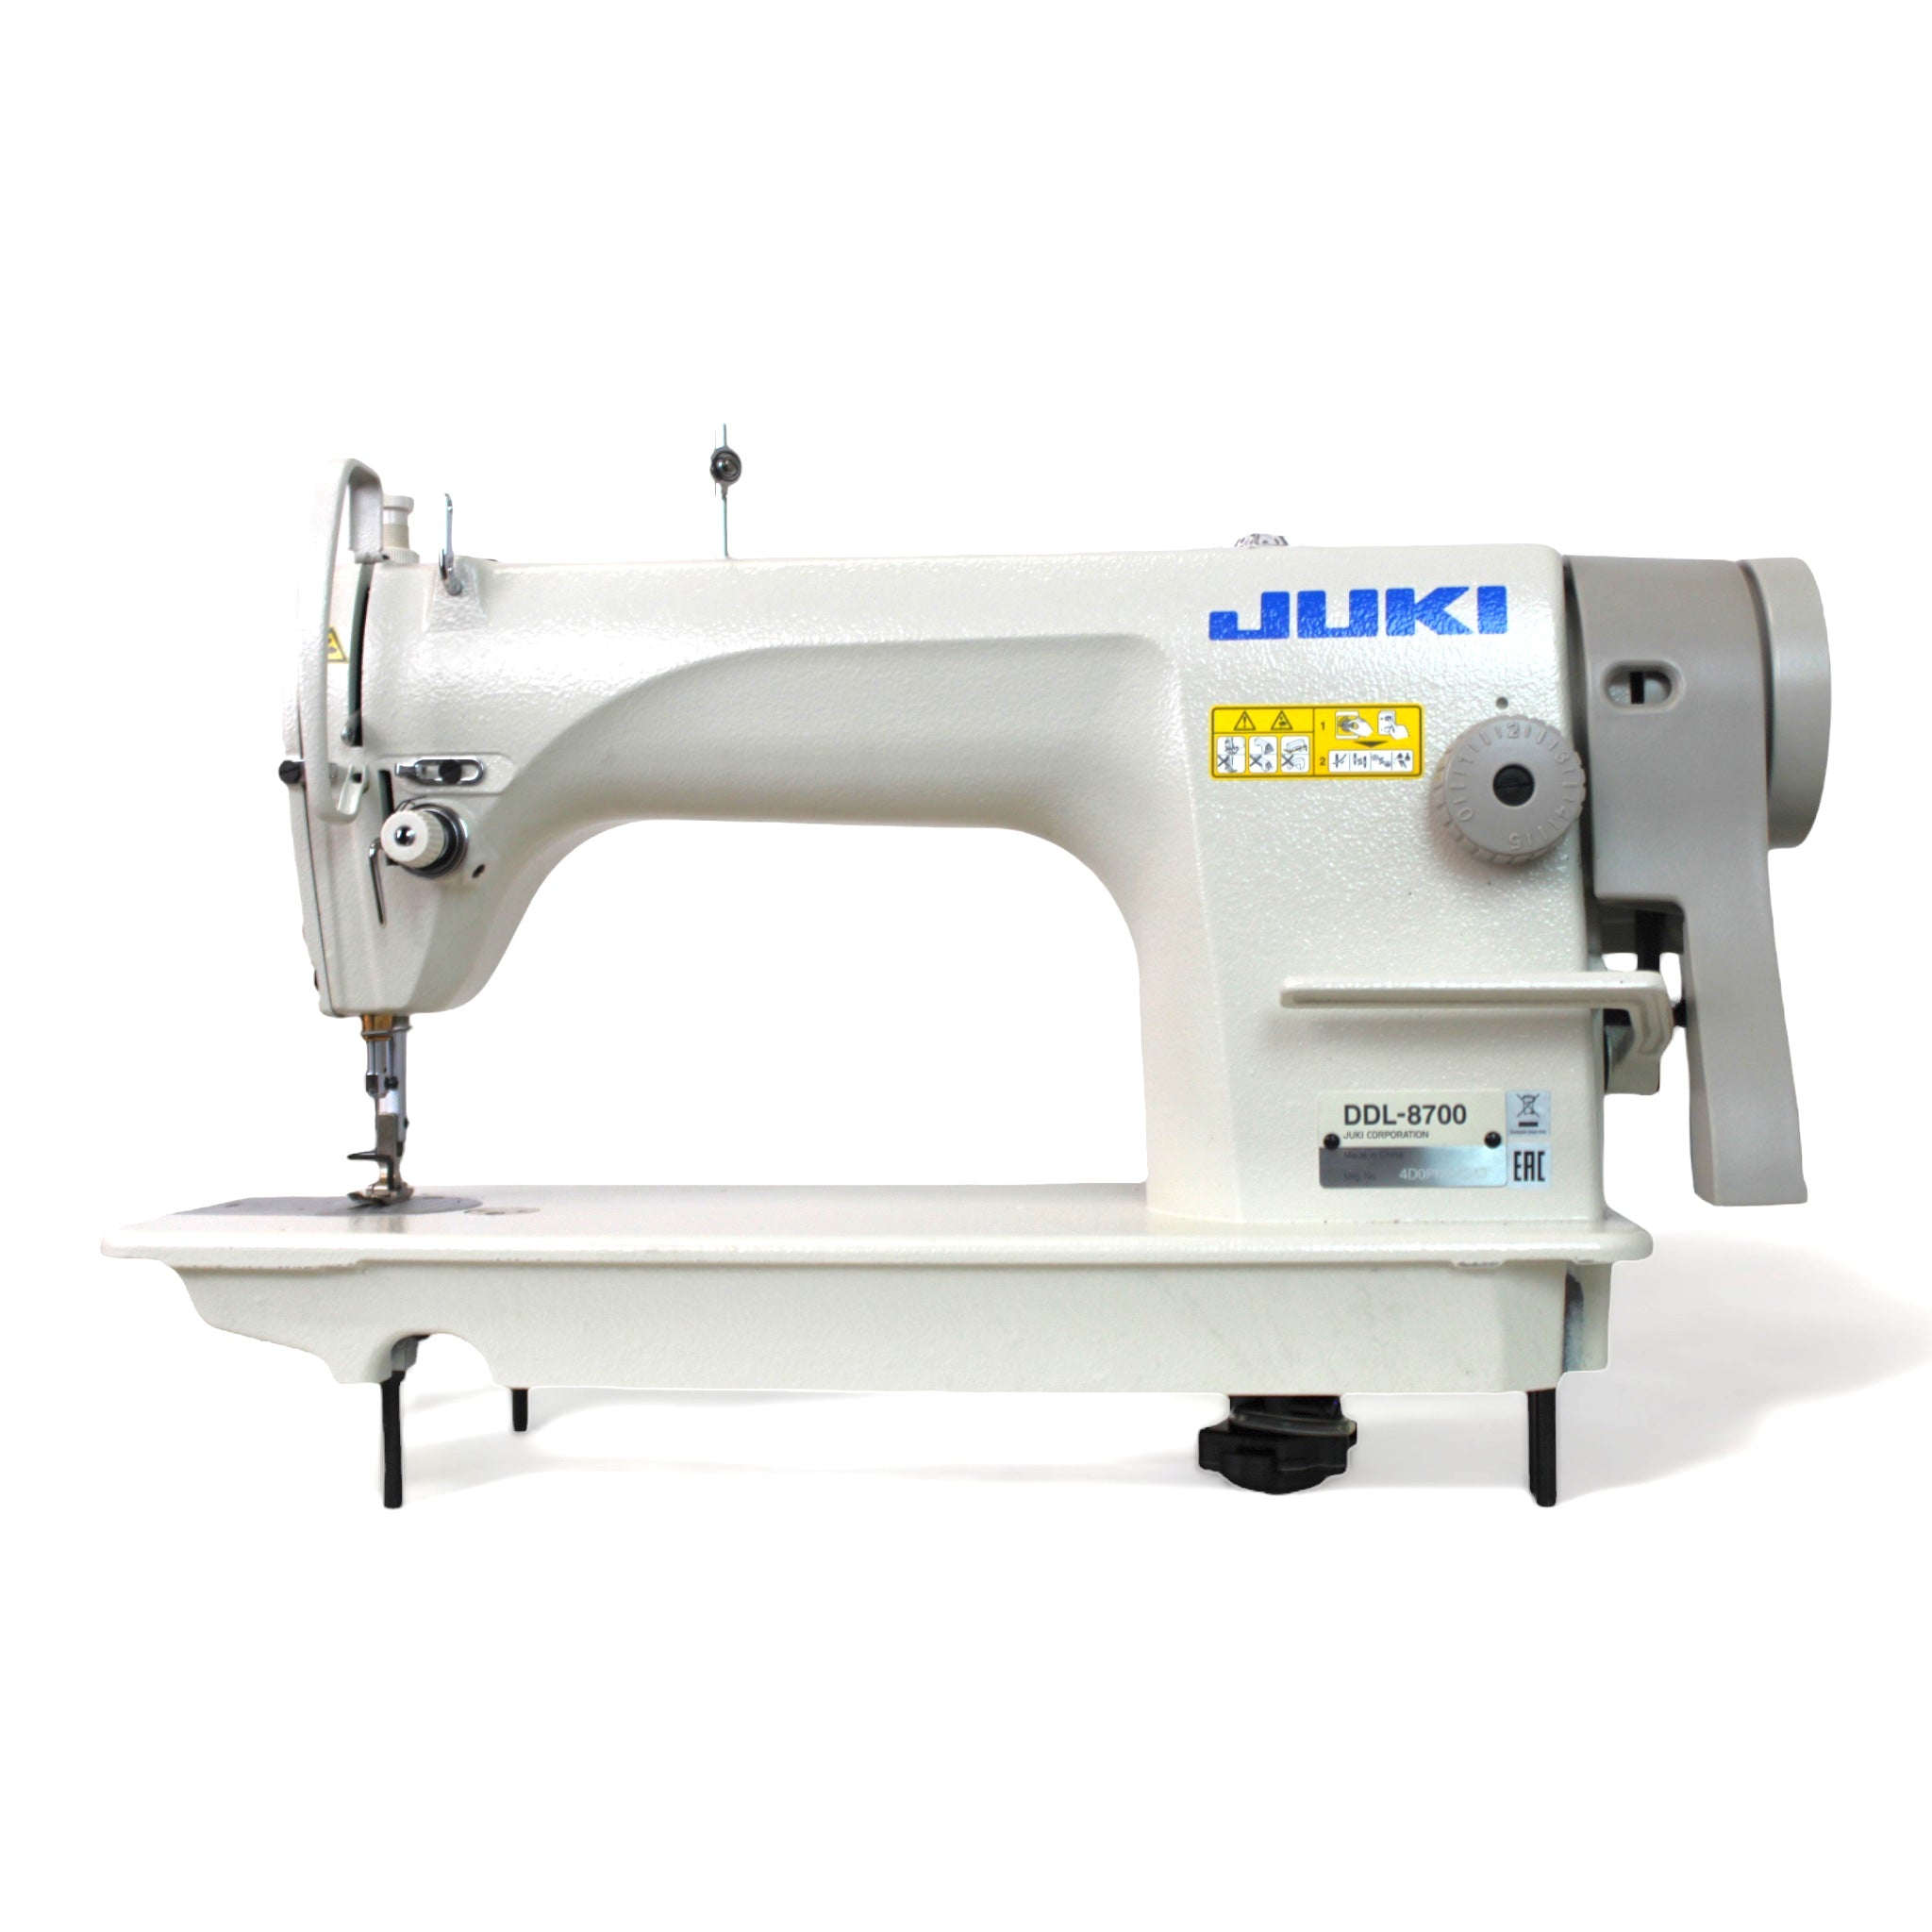 JUKI DDL-8700 Single Needle Lockstitch Industrial Sewing Machine Assembled with Servo Motor, Table and Stand Included